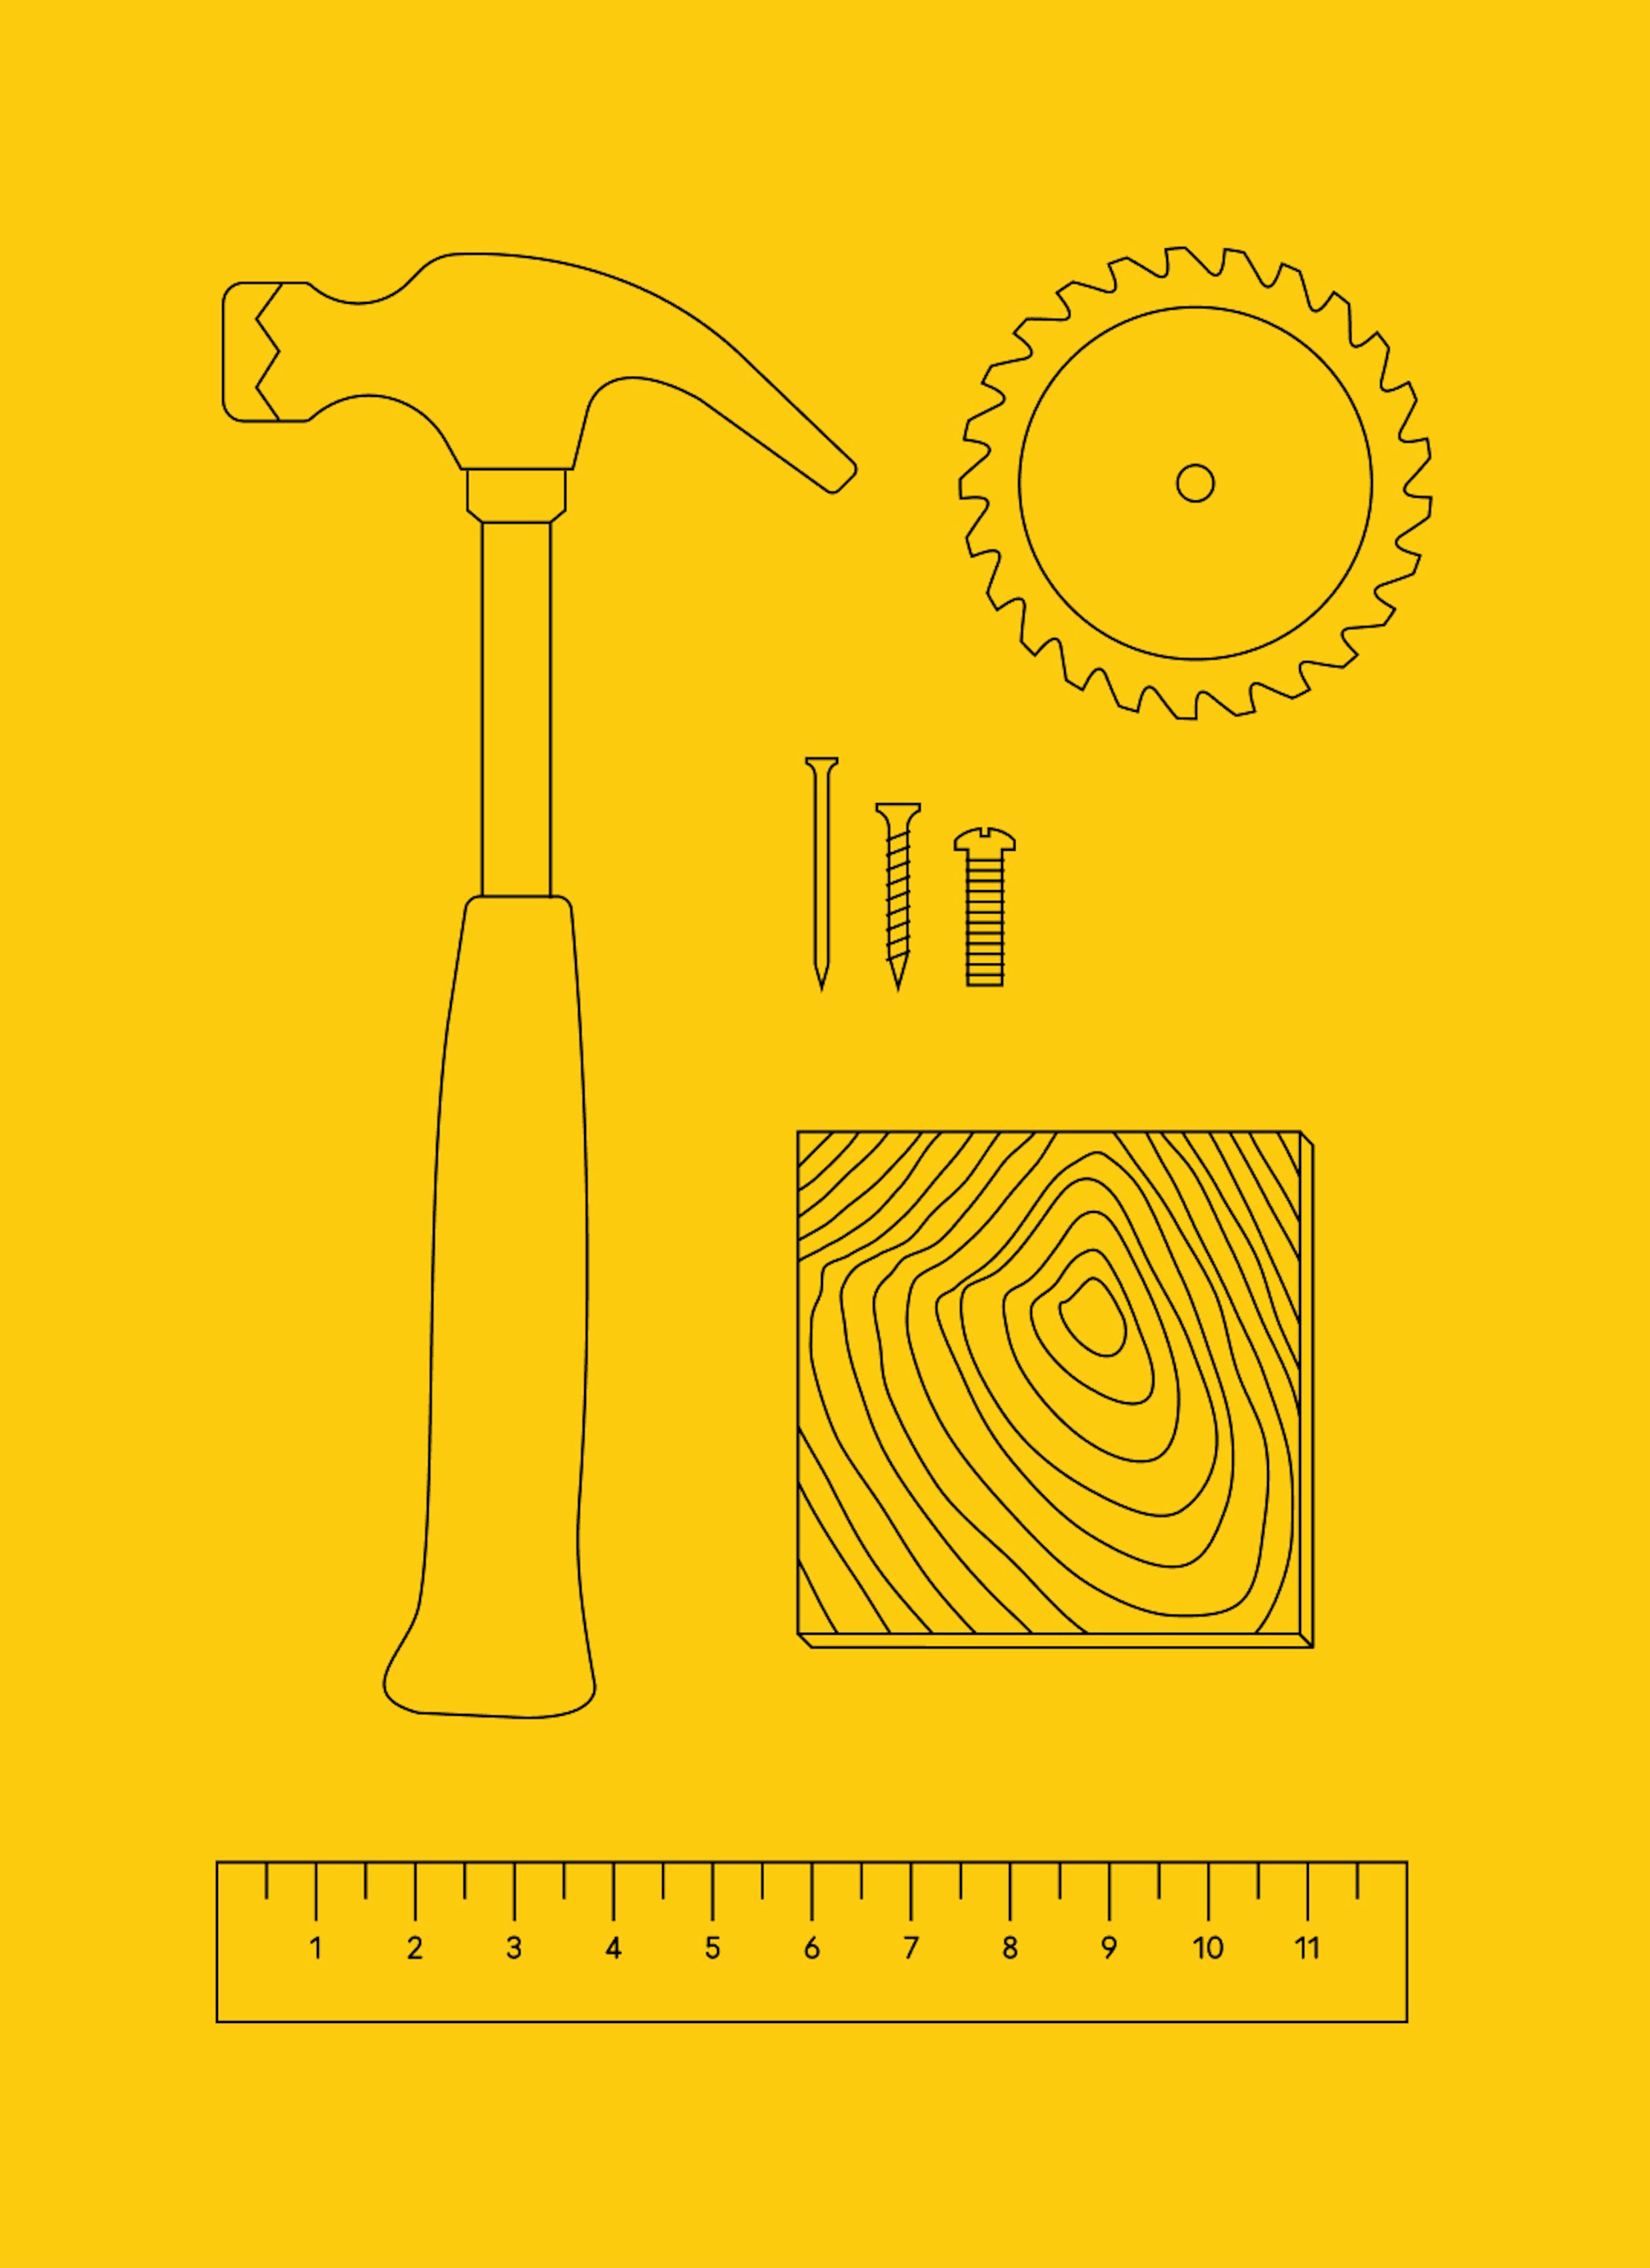 A hammer, saw blade, nail, screw, machine screw, wooden board, ruler in black outline illustration style with a yellow background